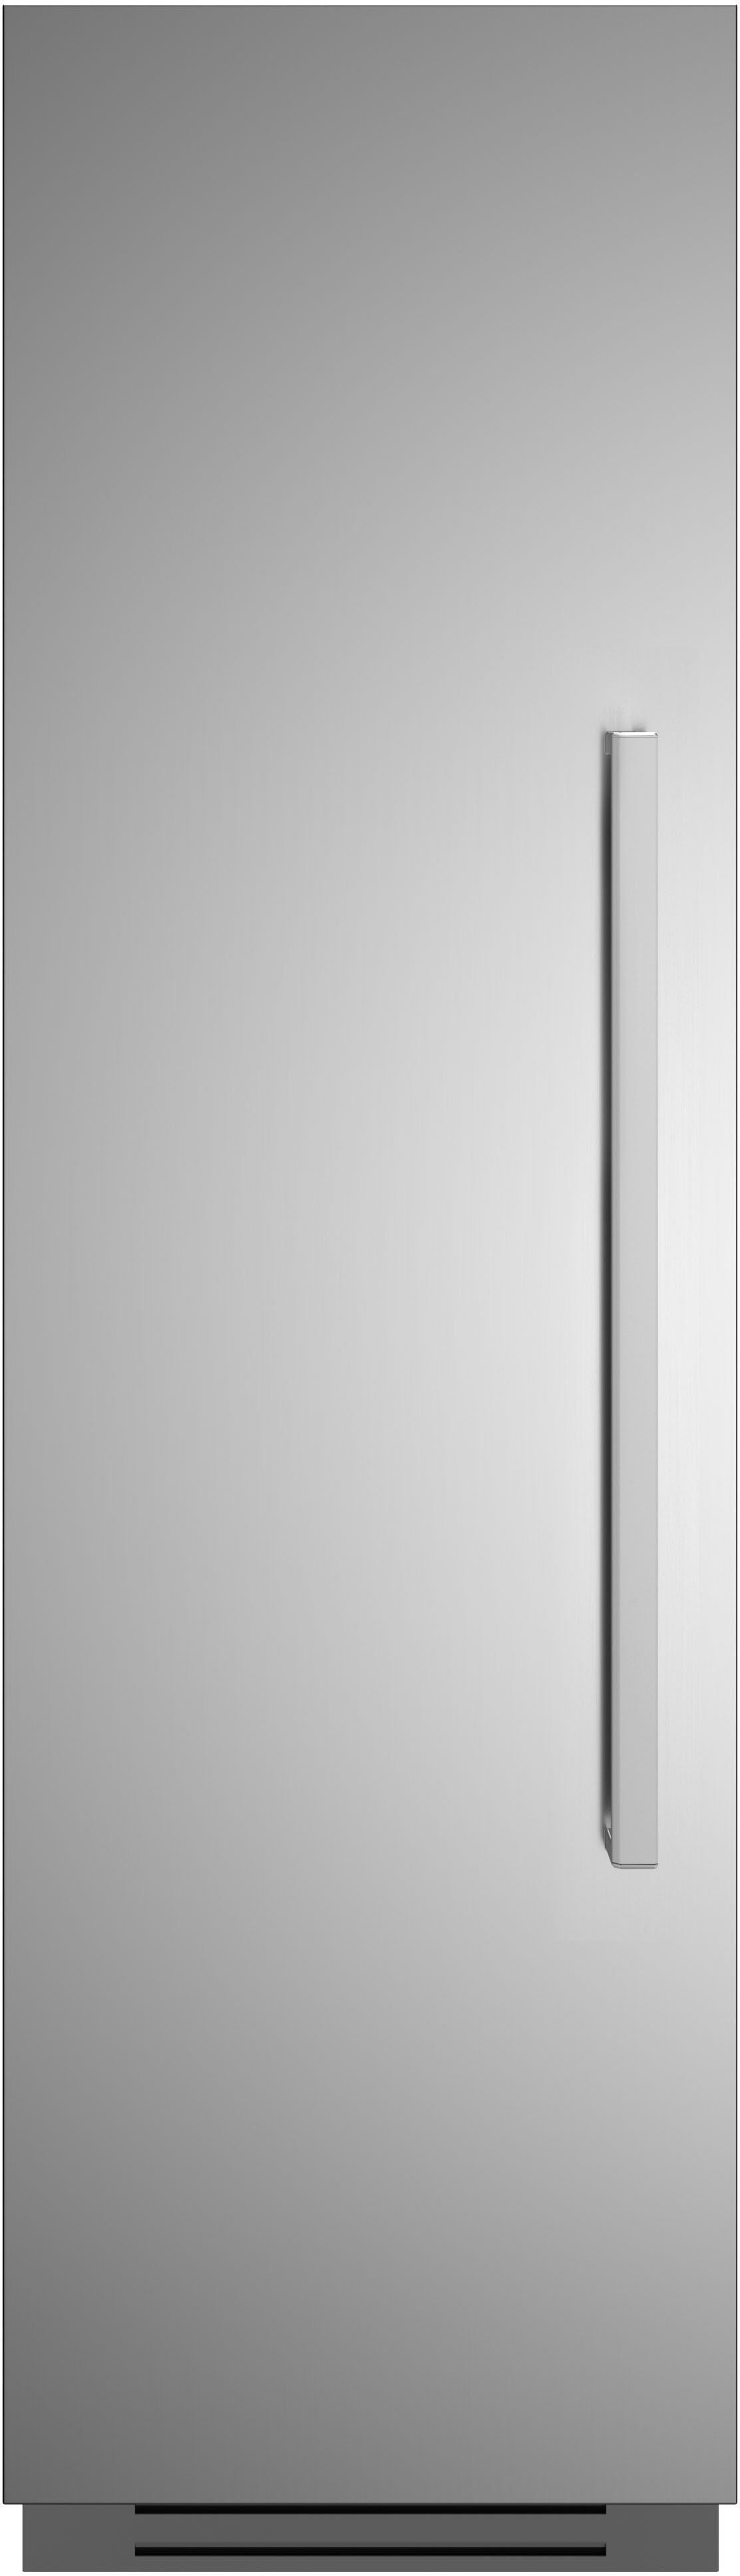 Bertazzoni - 13.0 cu ft Built-in Refrigerator Column with interior TFT touch & scroll interface - Stainless Steel